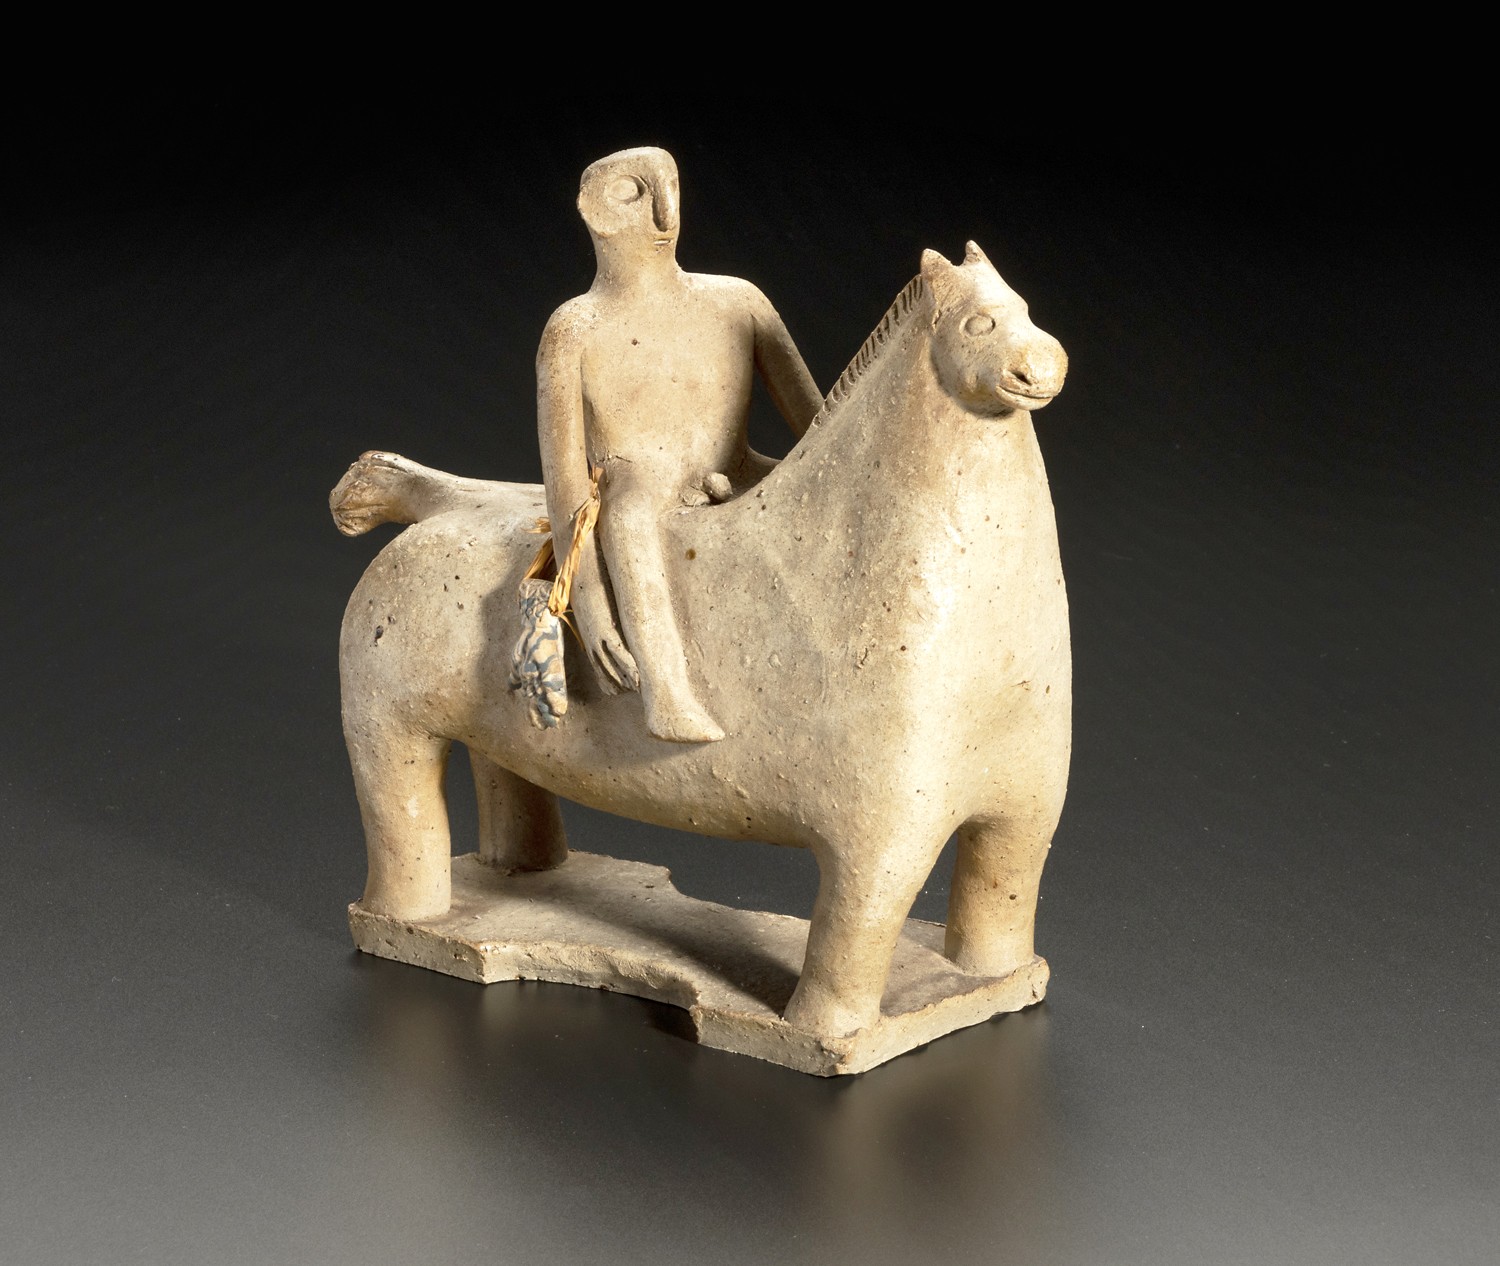 HYLTON NEL (SOUTH AFRICAN 1941 - ): A STONEWARE FIGURE OF A MAN ON A HORSE, 1960s